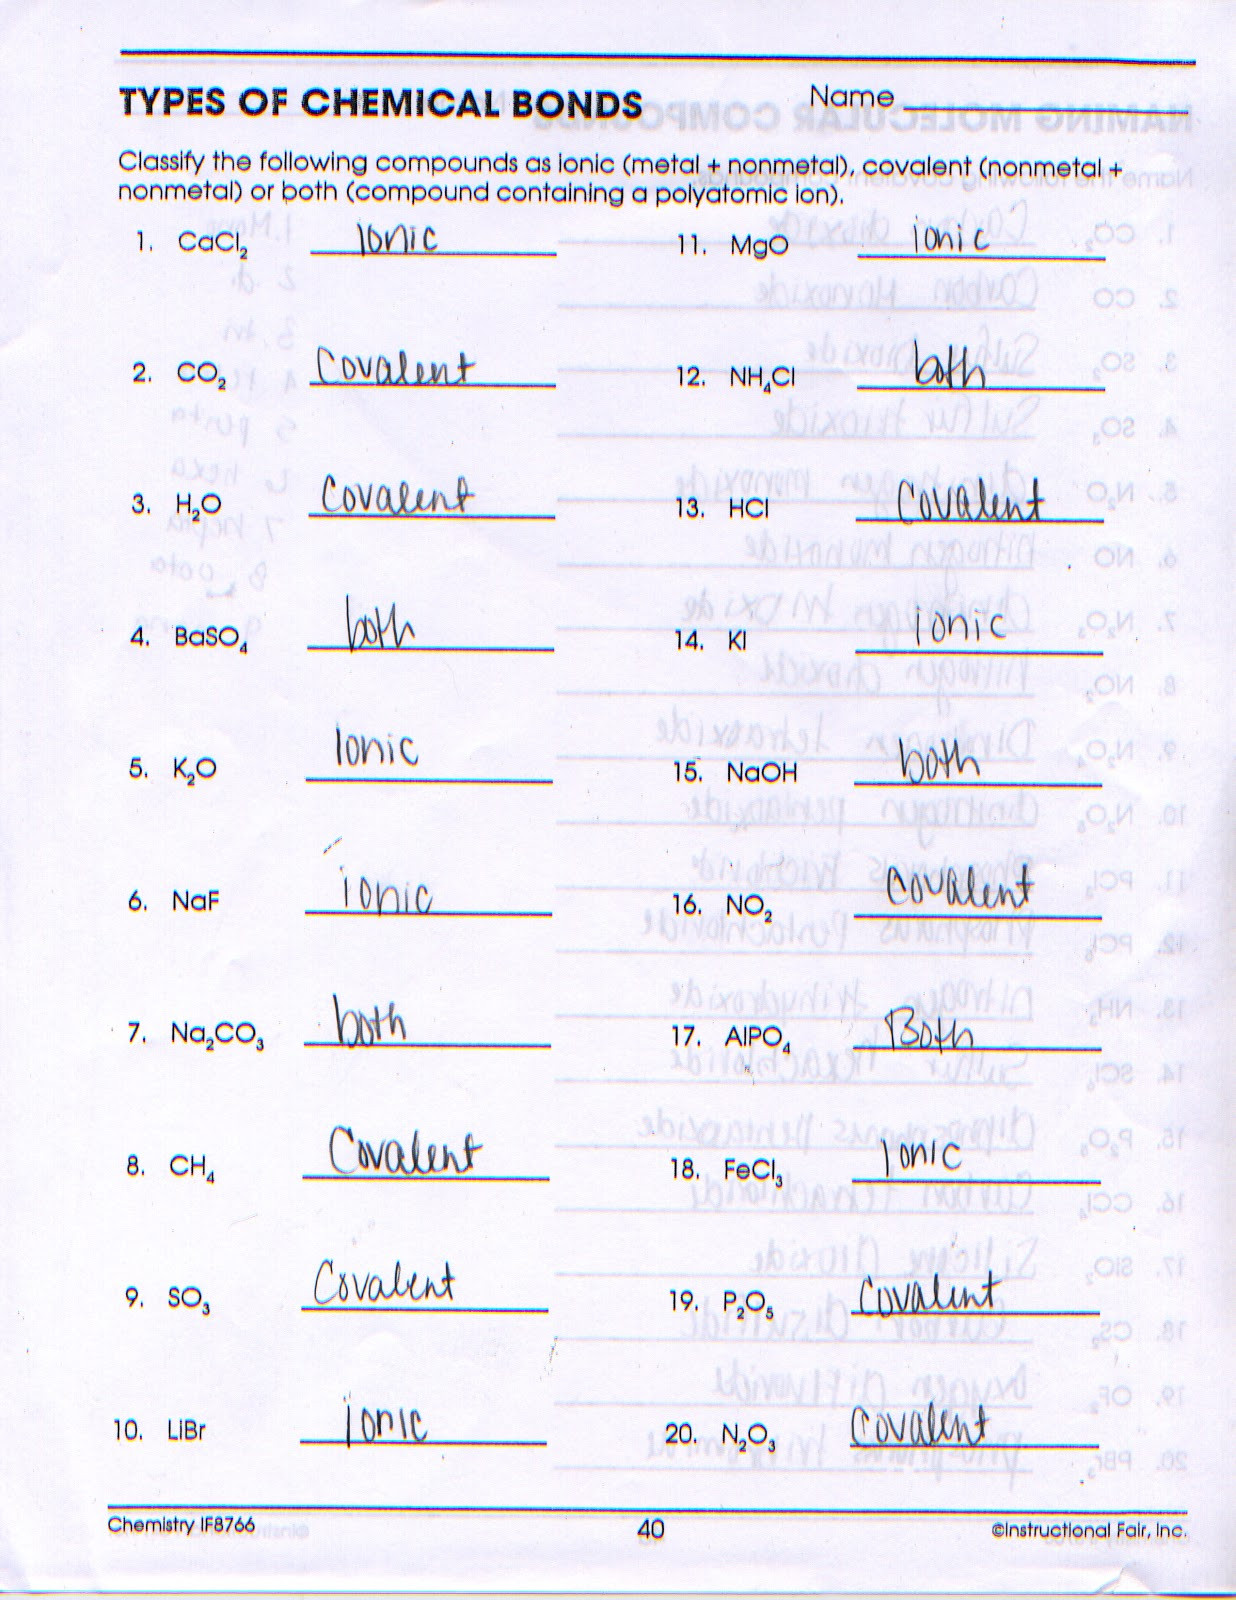 Chemical Bonds Worksheet Answers 34 Chemical Bonds Worksheet Answers Worksheet Resource Plans